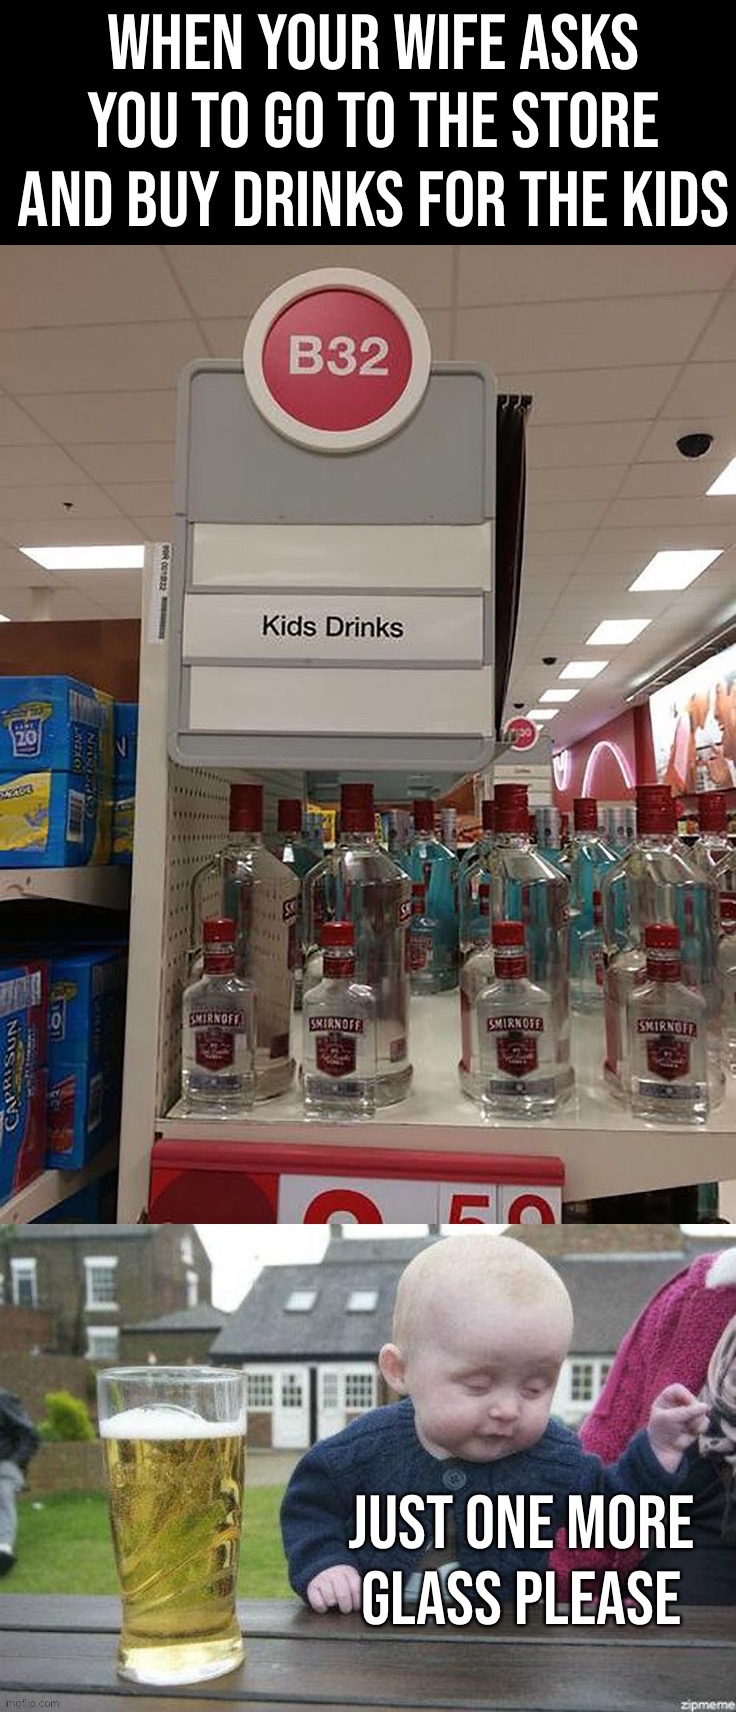 Drinks for the family! Even the kids! | image tagged in memes,funny,drunk baby,alcohol,oh heck,drinks | made w/ Imgflip meme maker